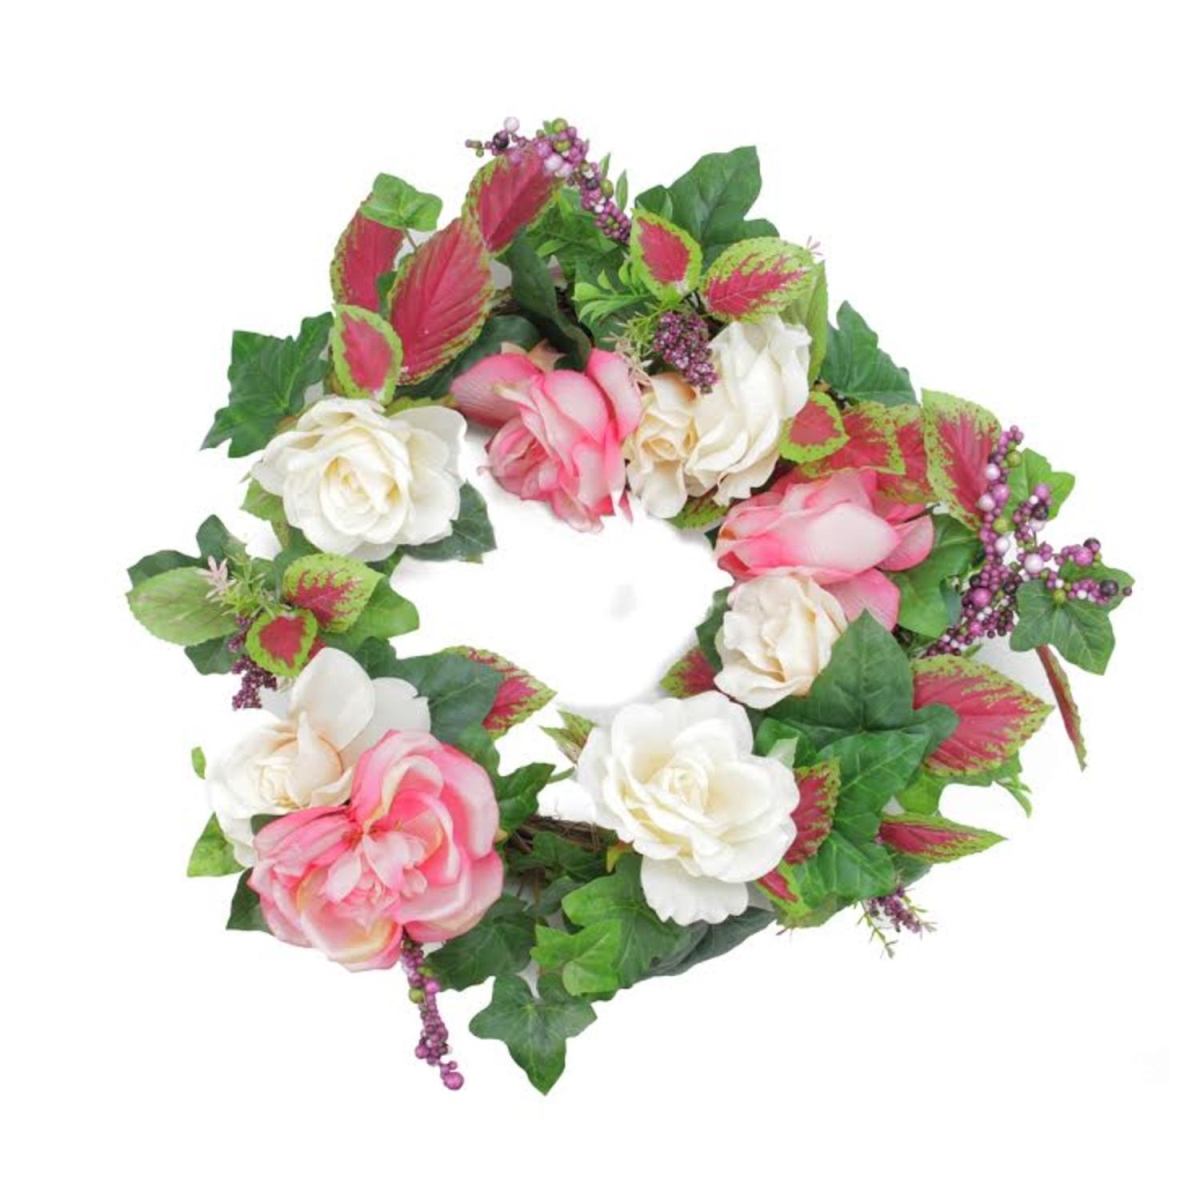 32038122 22.5 In. Decorative Cream & Pink Rose Flowers & Berries Artificial Spring Floral Wreath